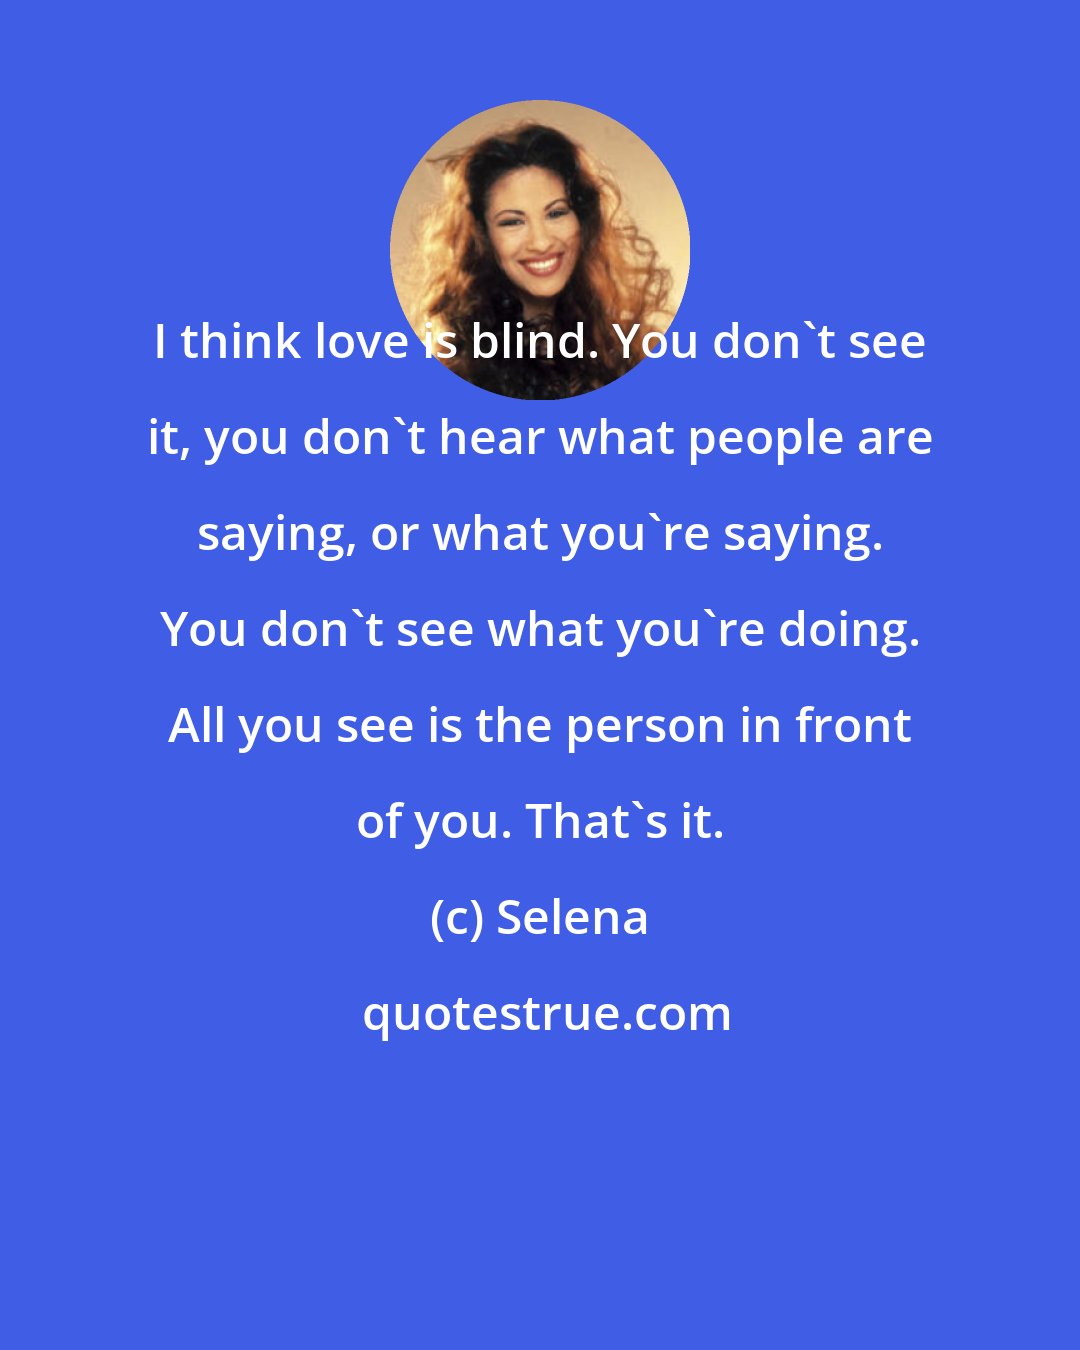 Selena: I think love is blind. You don't see it, you don't hear what people are saying, or what you're saying. You don't see what you're doing. All you see is the person in front of you. That's it.